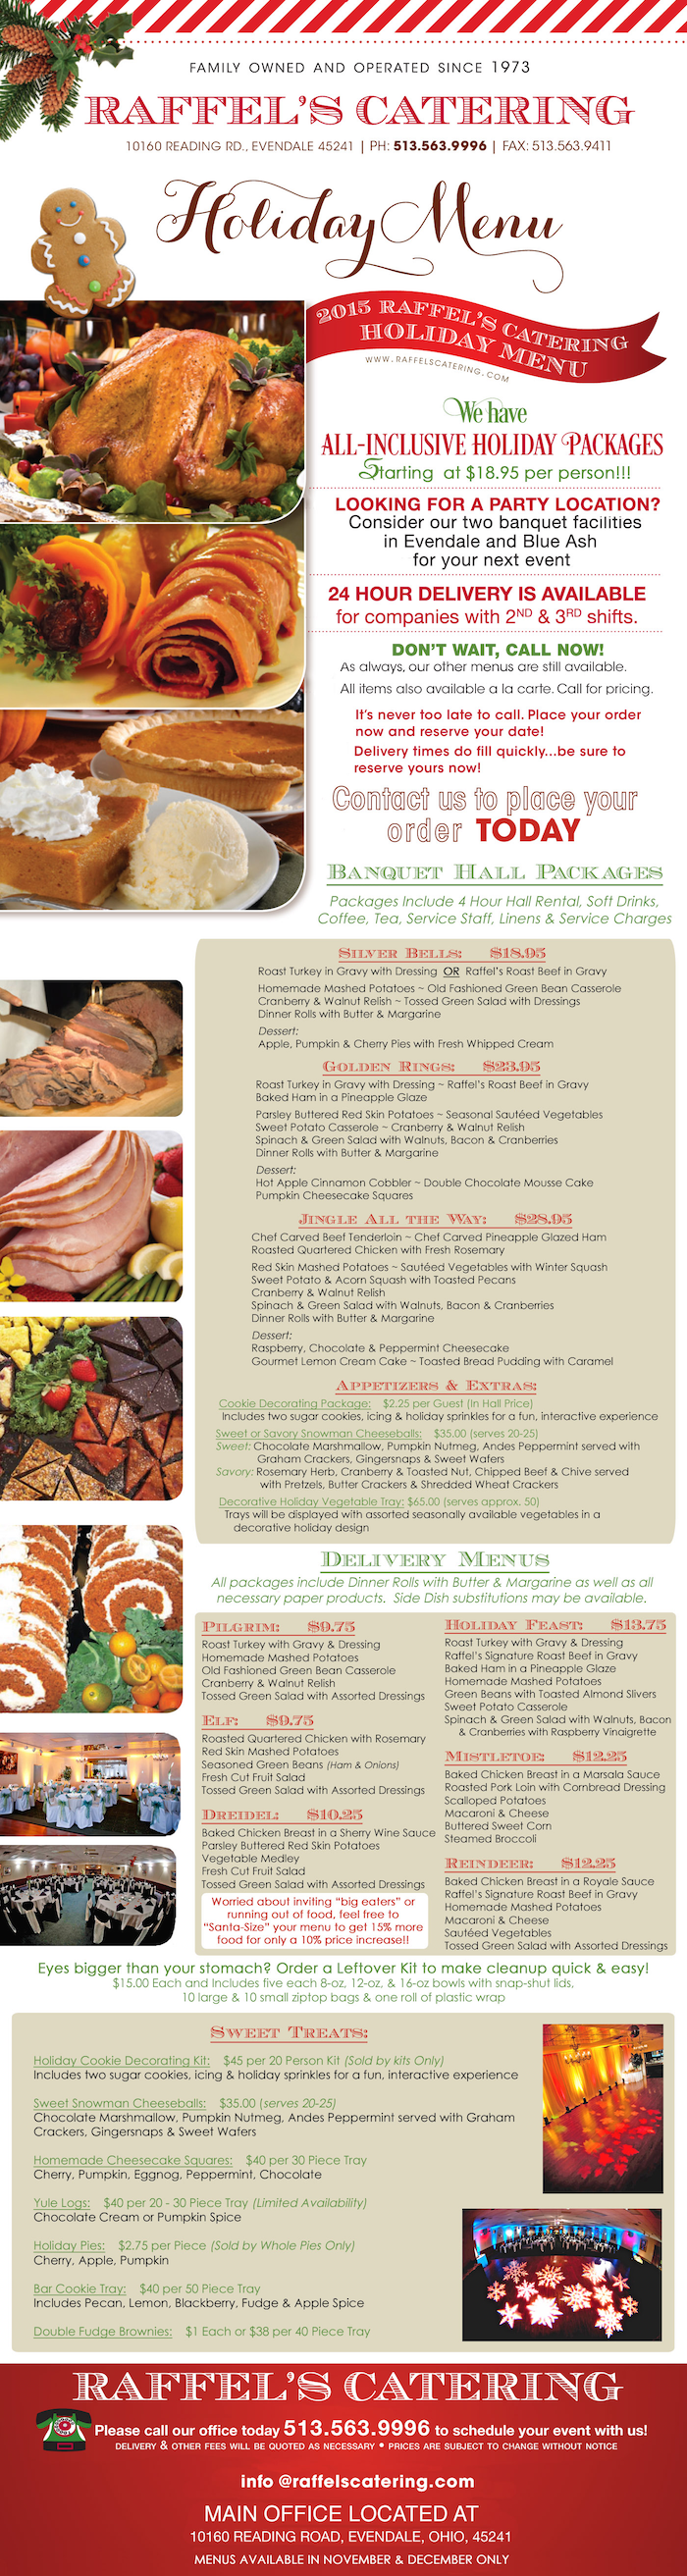 The NEW holiday catering menu from Raffel's Catering.